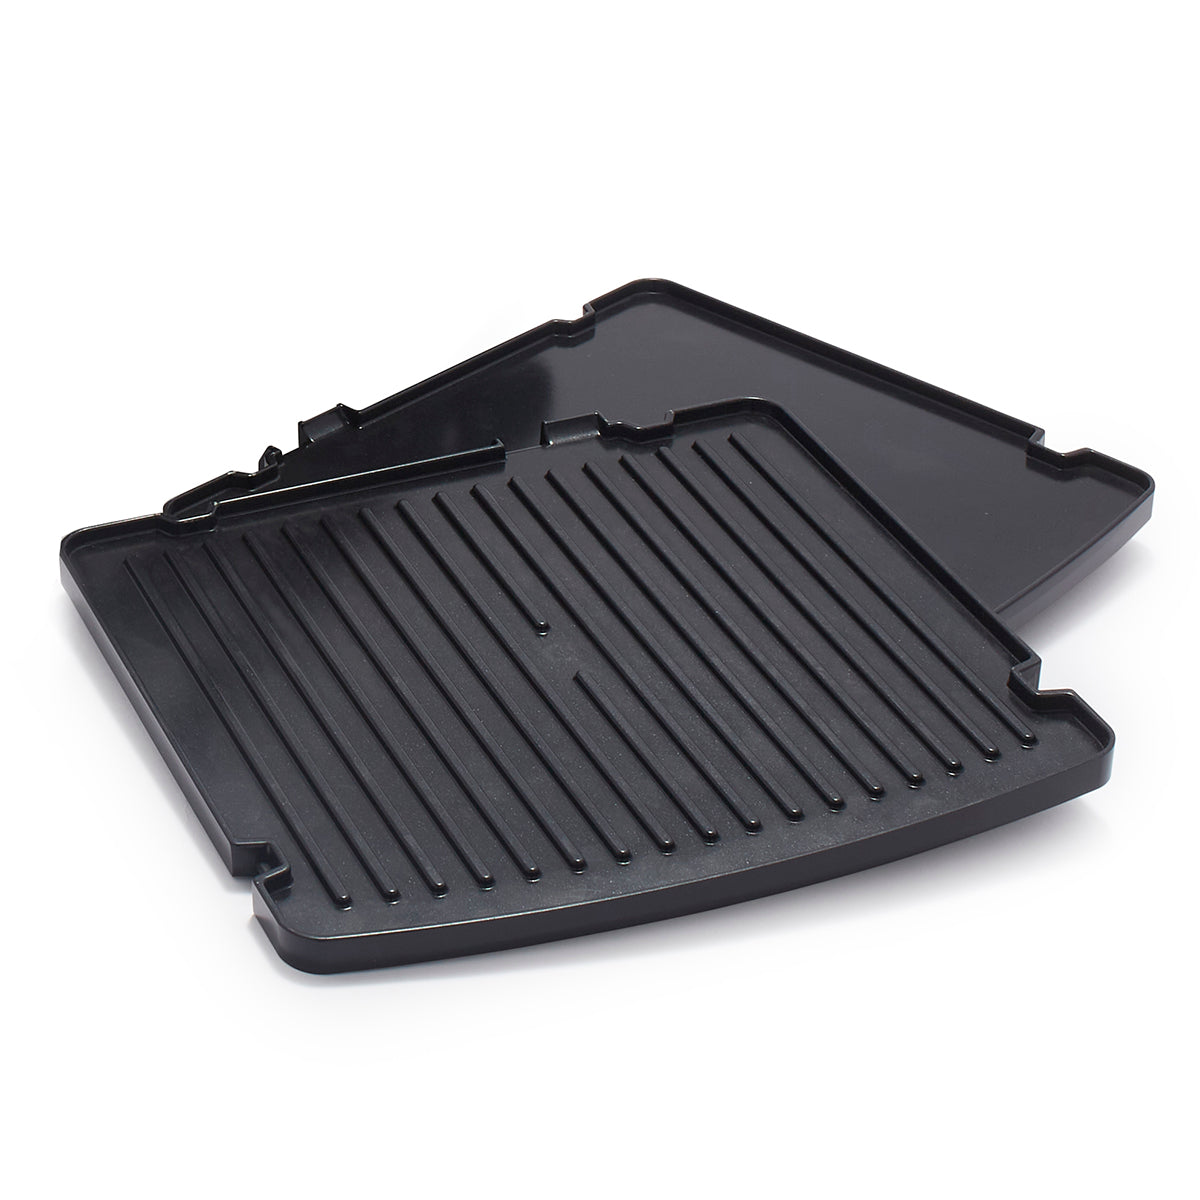 CC006852 001 Kitchen Appliances Grill Griddle Plates For Contact Grill 1 1200x ?v=1665987120